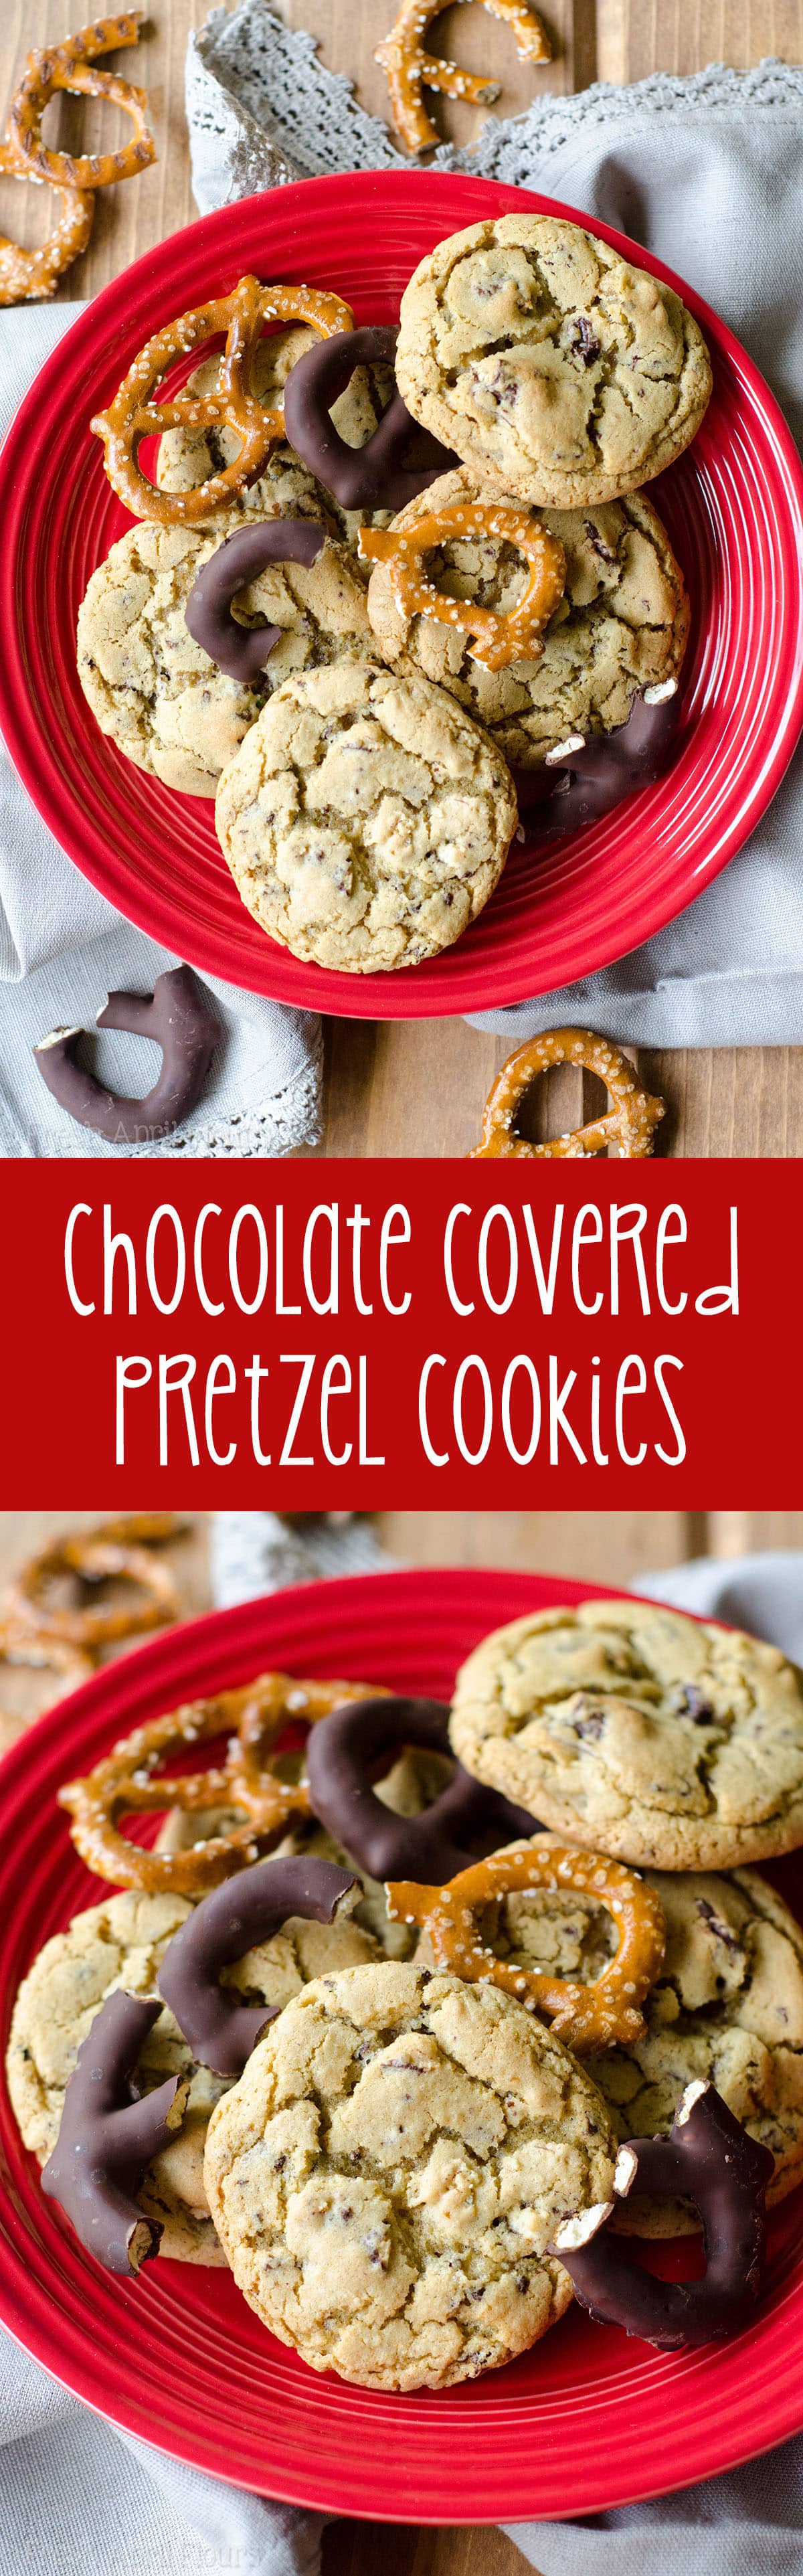 Chocolate Covered Pretzel Cookies: Simple brown sugar cookies filled with sweet and salty chocolate covered pretzels. via @frshaprilflours